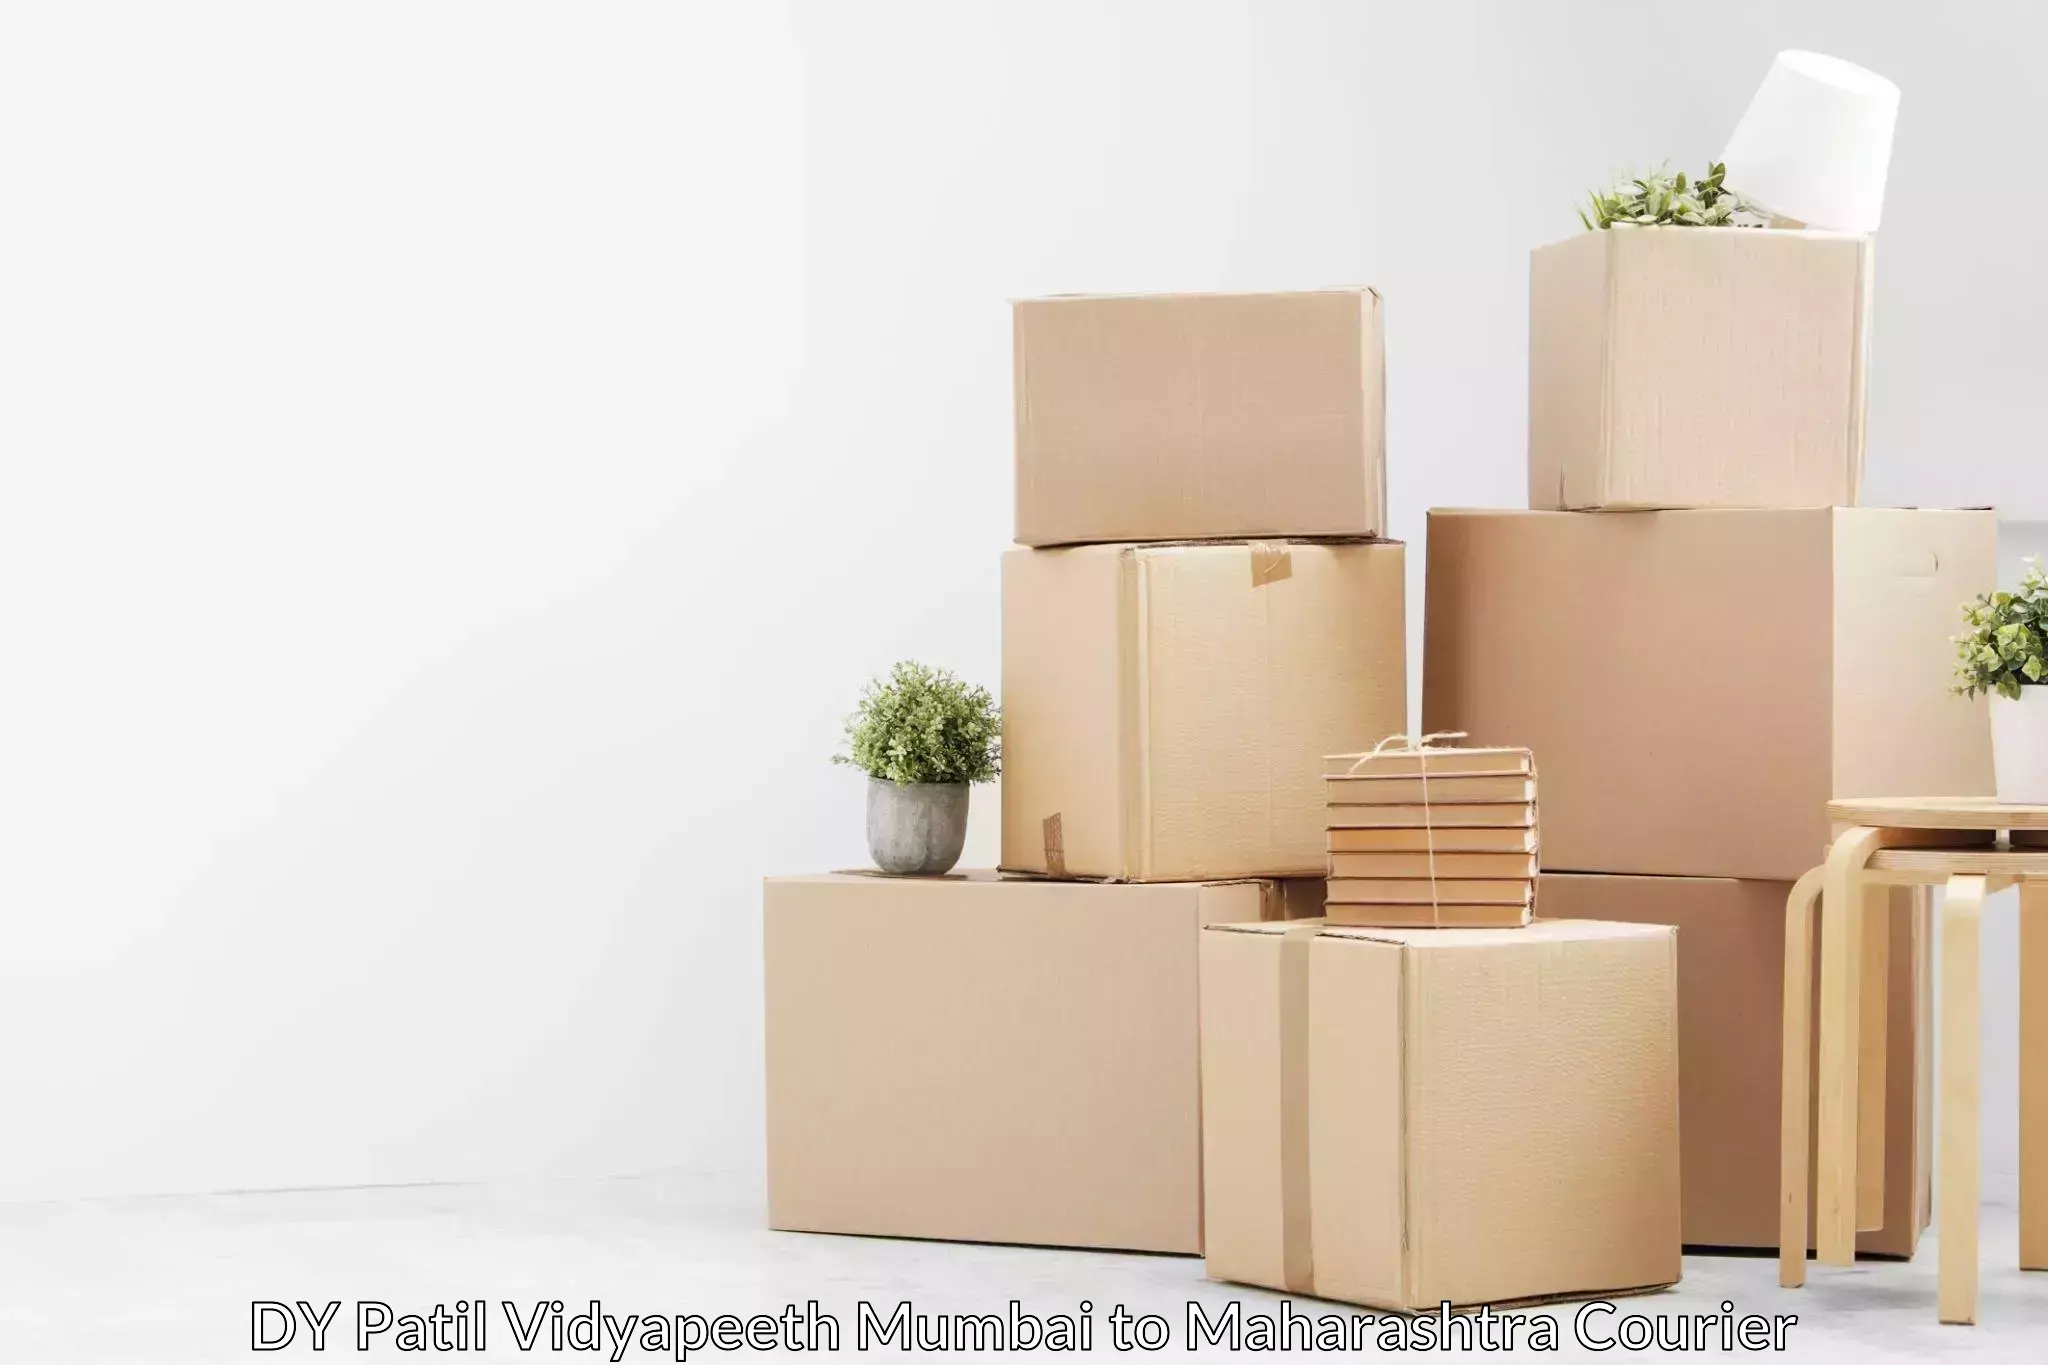 Professional movers and packers DY Patil Vidyapeeth Mumbai to DY Patil Vidyapeeth Mumbai